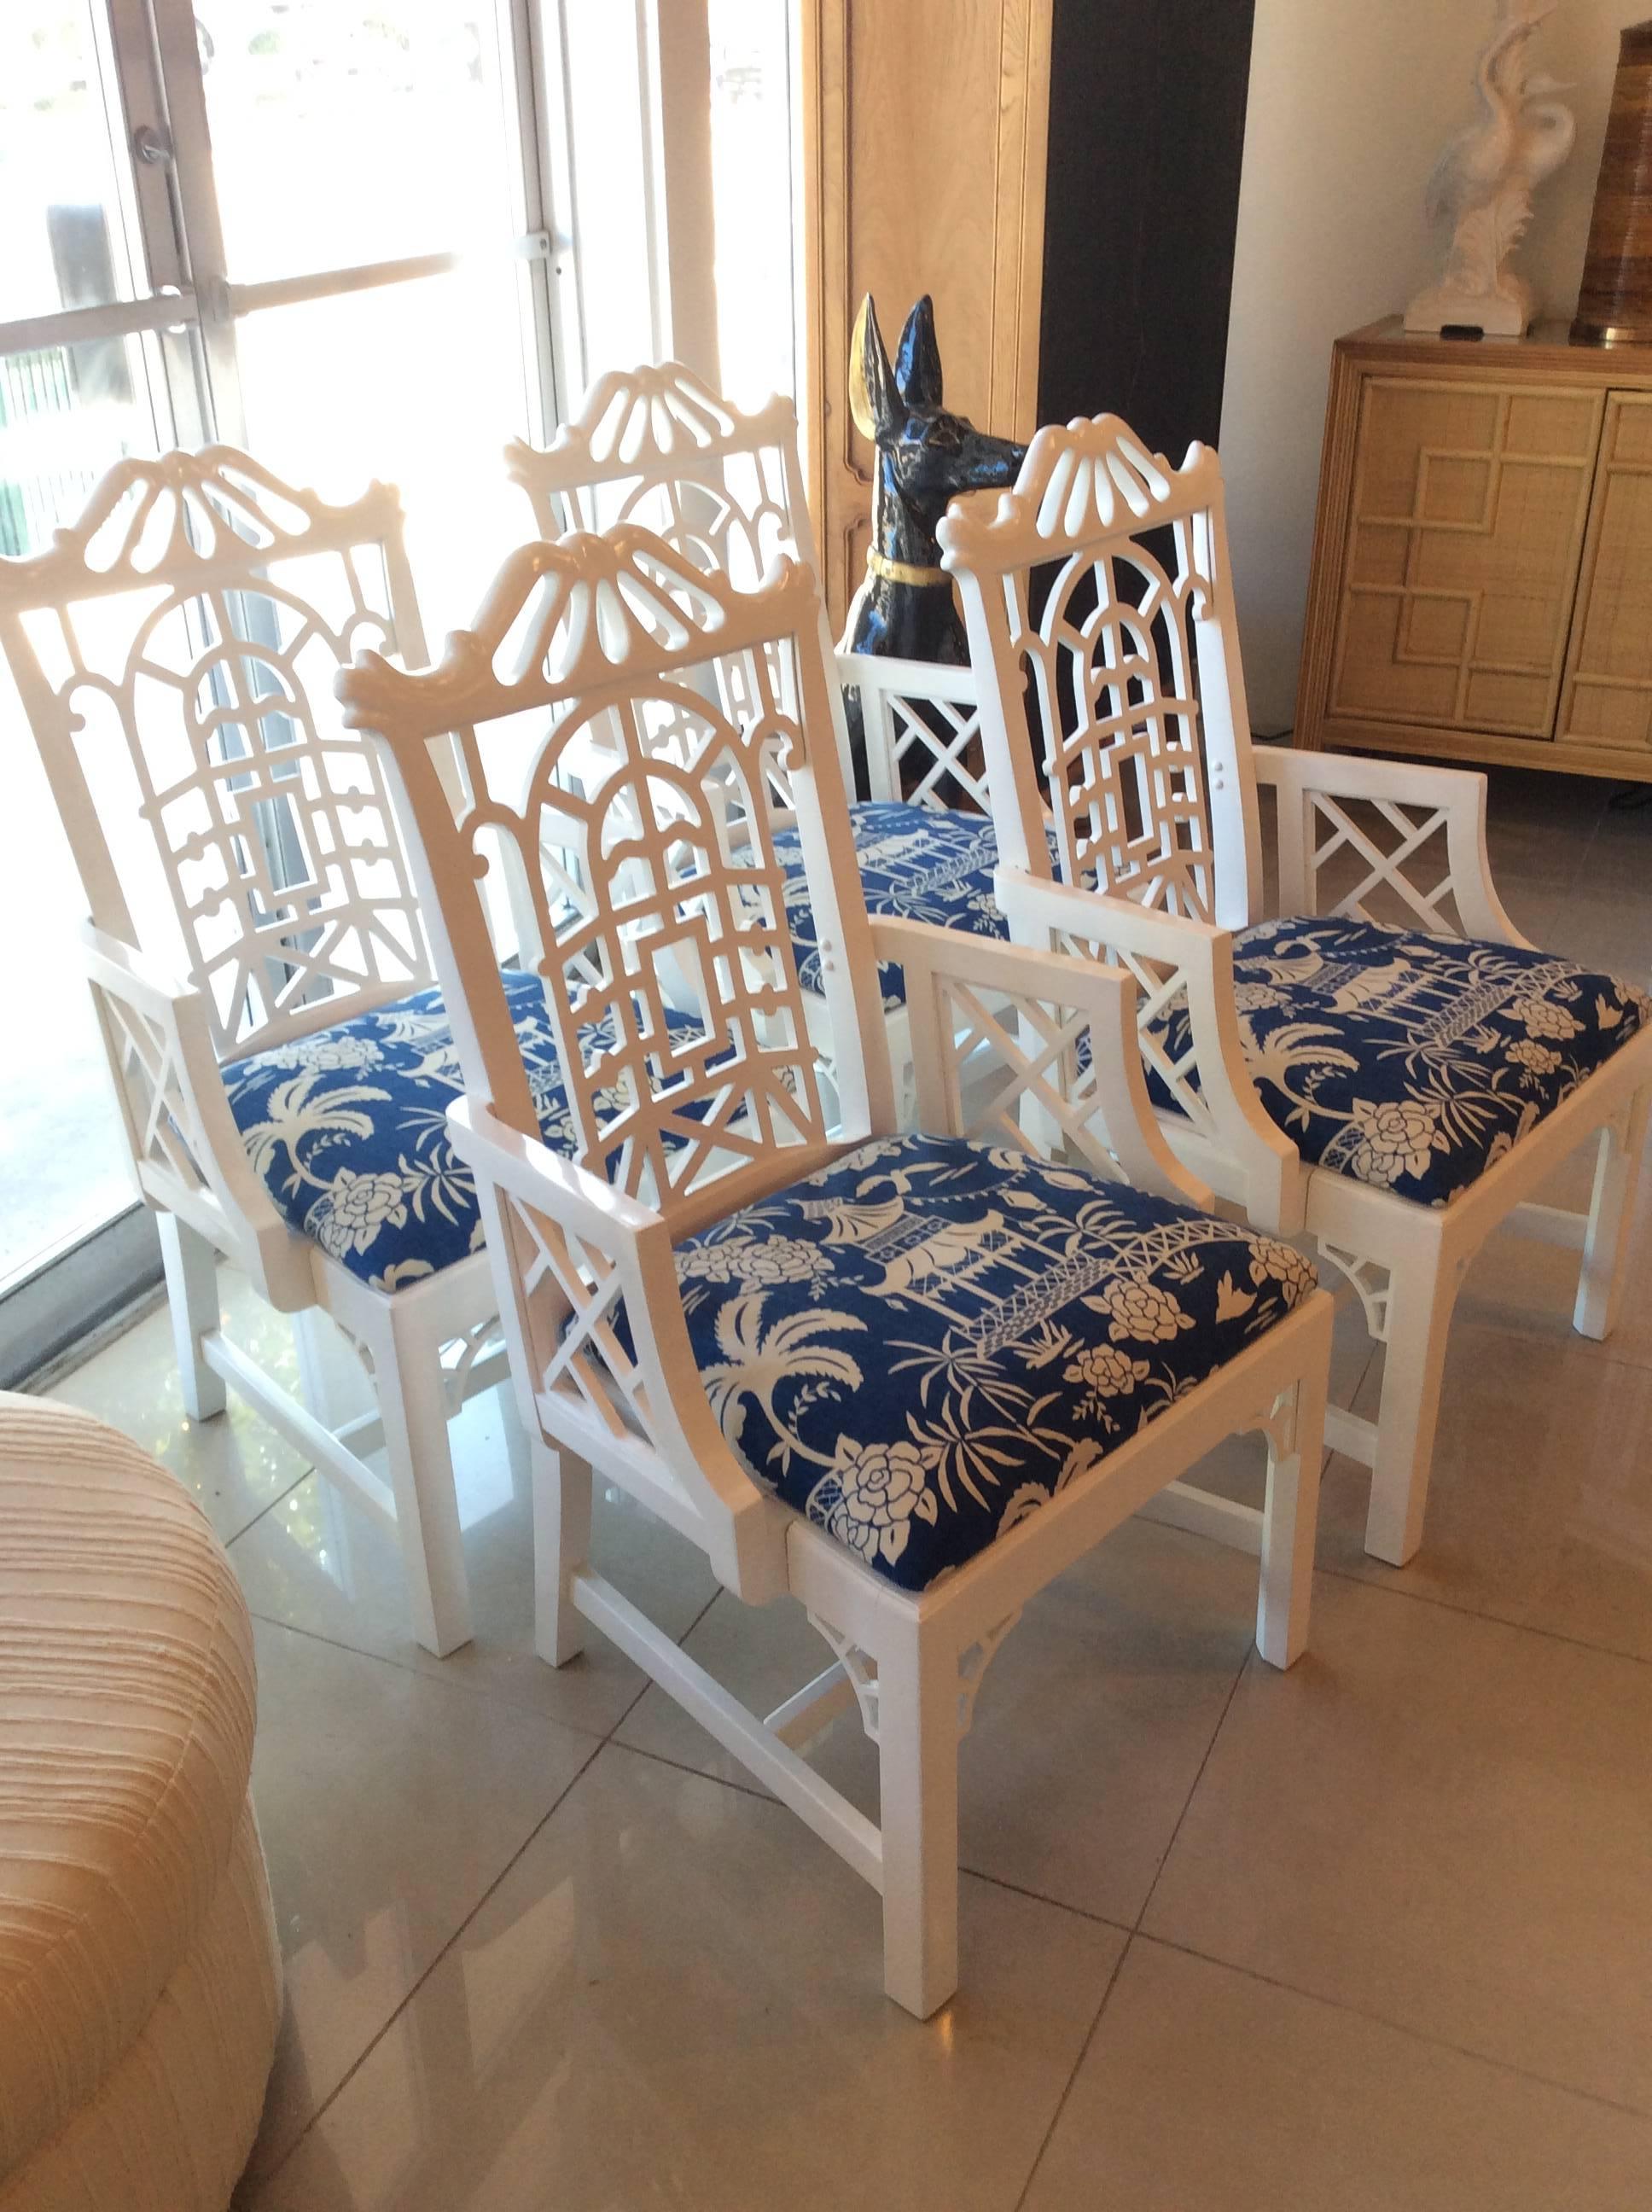 Amazing vintage PAIR of arm dining chairs, pagoda top, Chinese Chippendale, fretwork arms, newly upholstered pagoda navy blue linen cushions. Newly professionally lacquered in a white gloss. May be minor imperfections to the newly lacquered finish.